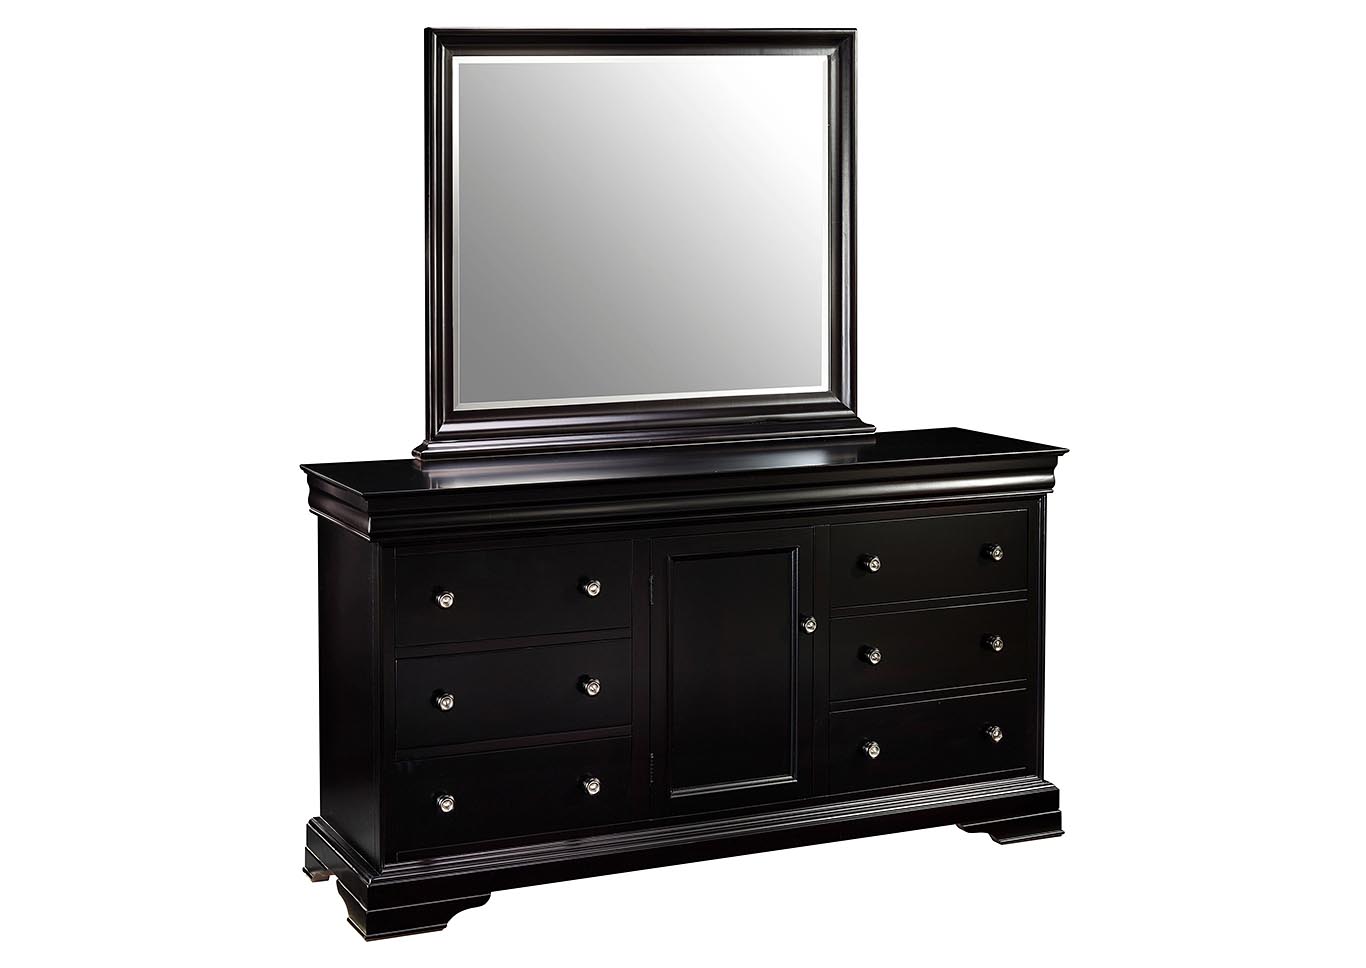 Belle Rose Black Cherry Dresser and Mirror,New Classic